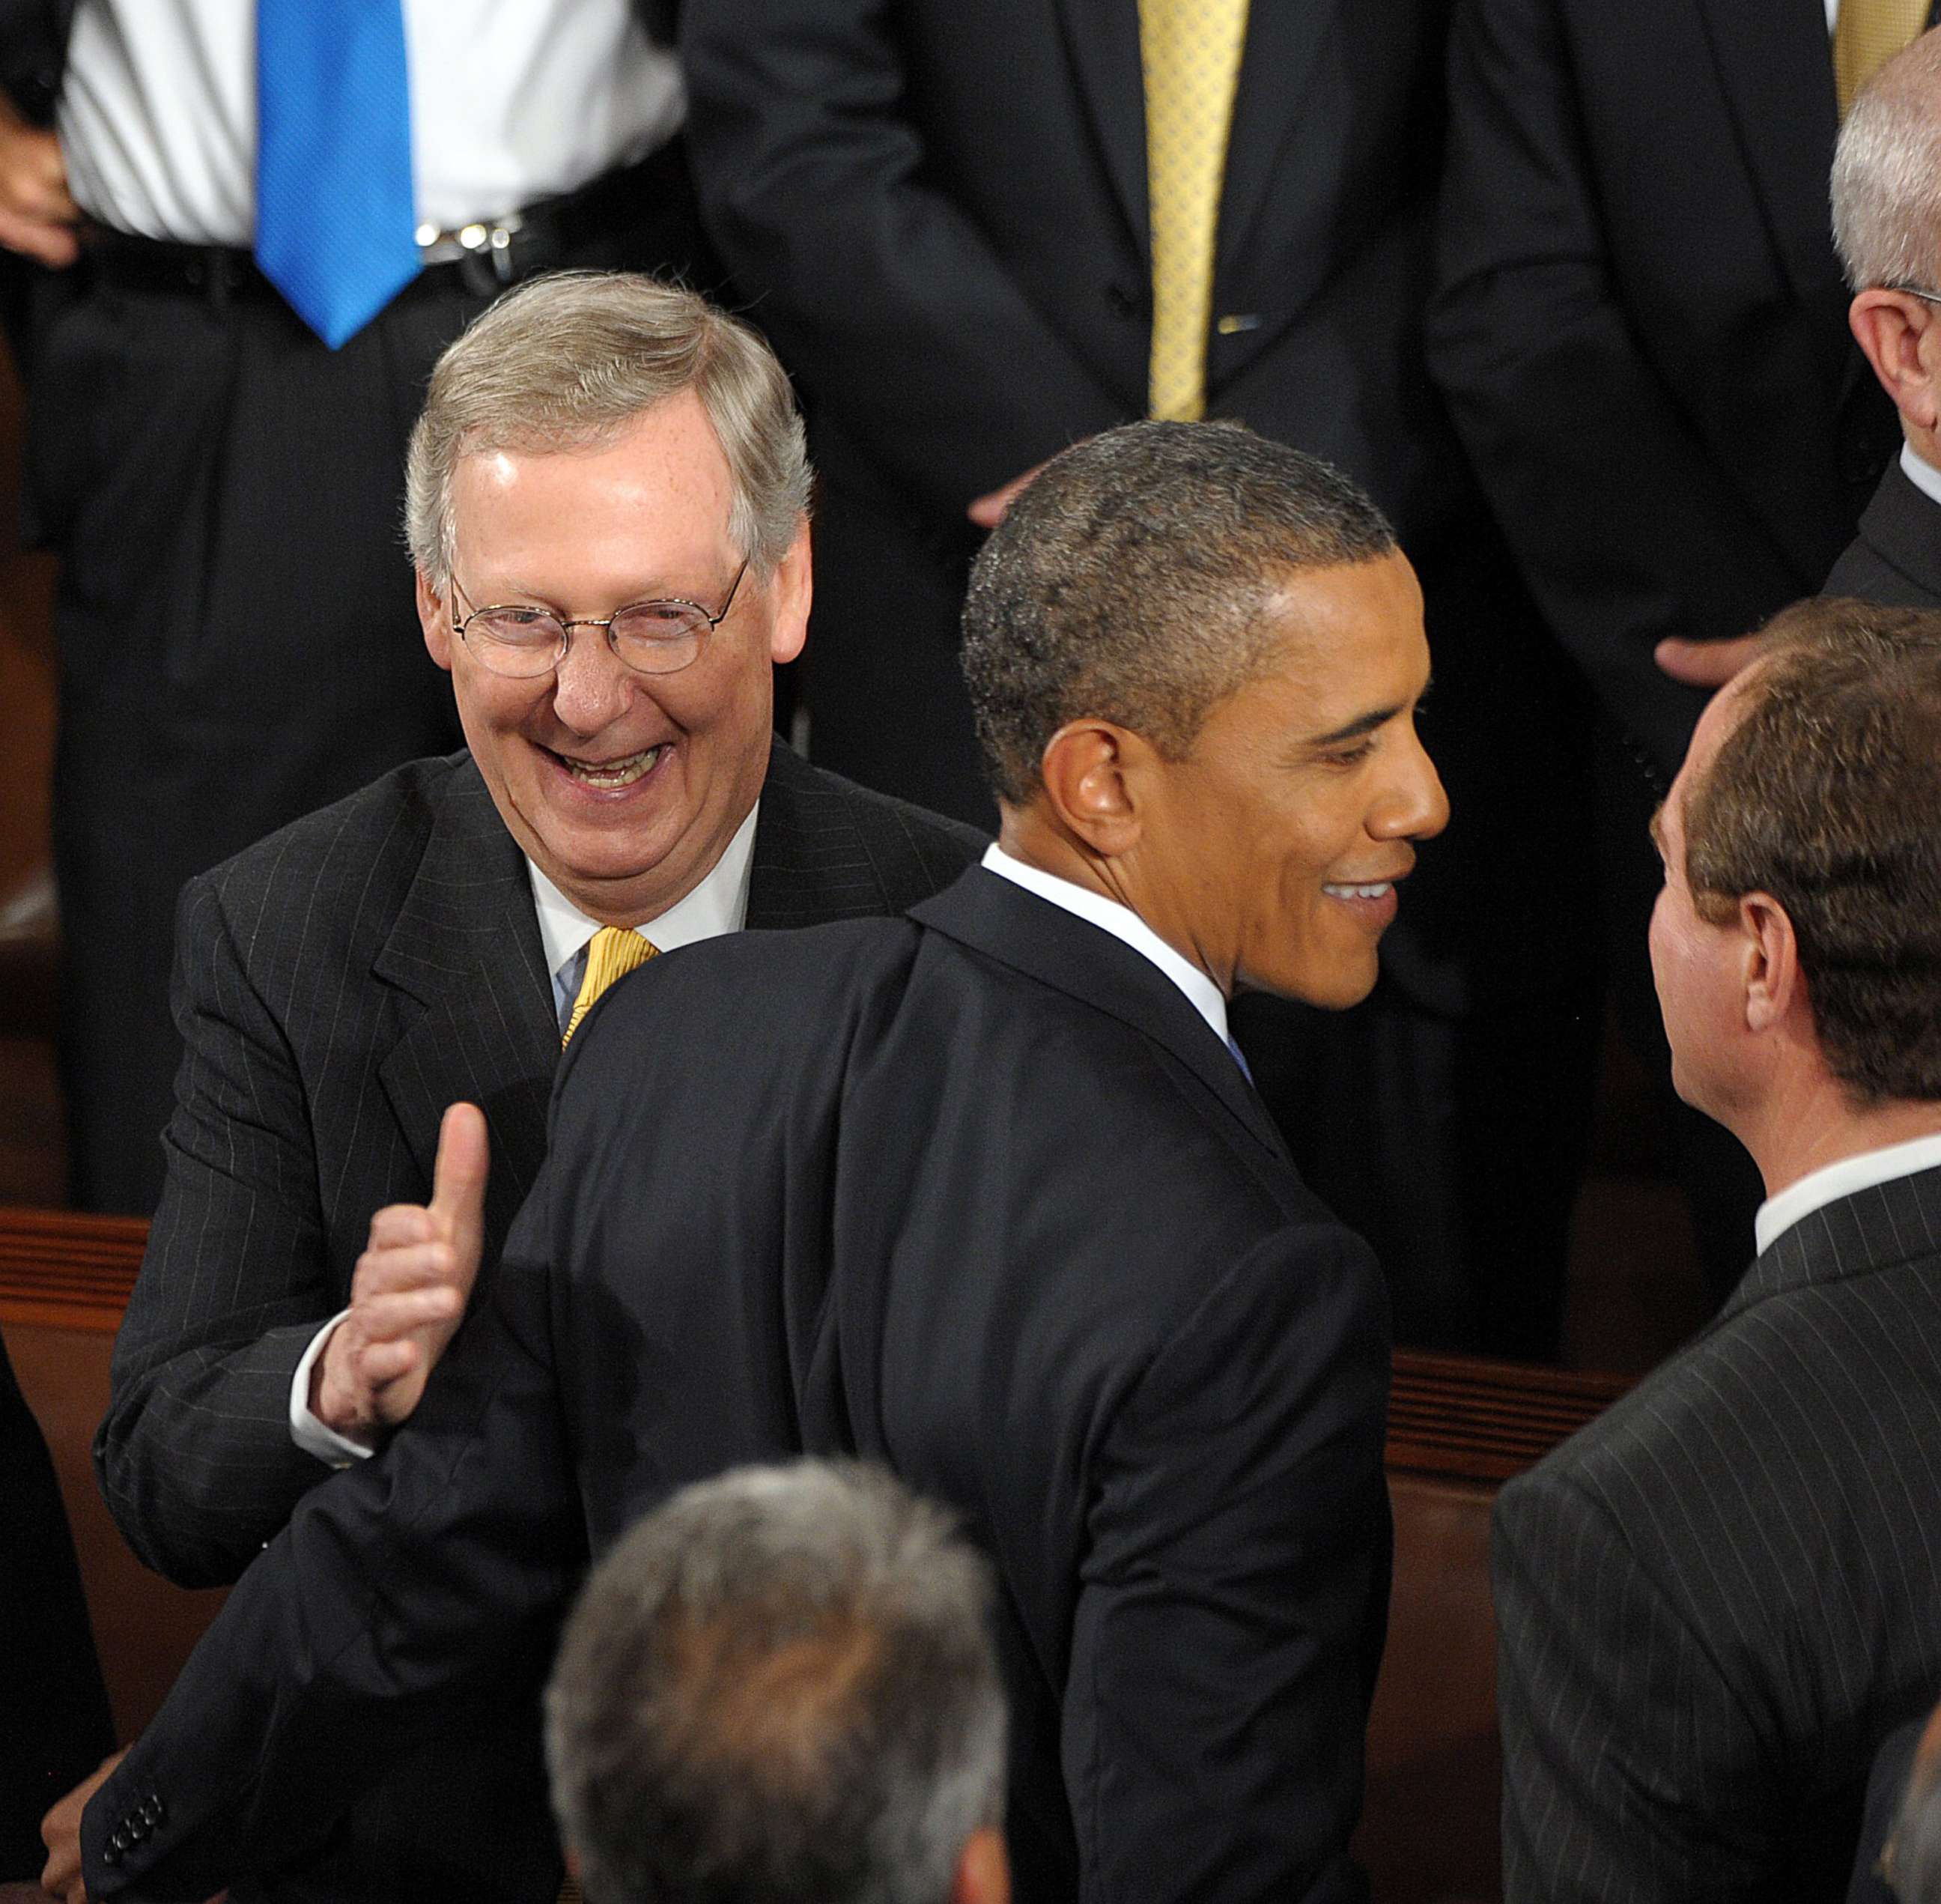 PHOTO: President Barack Obama is greeted by Senate Minority Leader Senator Mitch McConnell after Obama addressed a Joint Session of Congress on Sept. 8, 2011, on Capitol Hill in Washington.